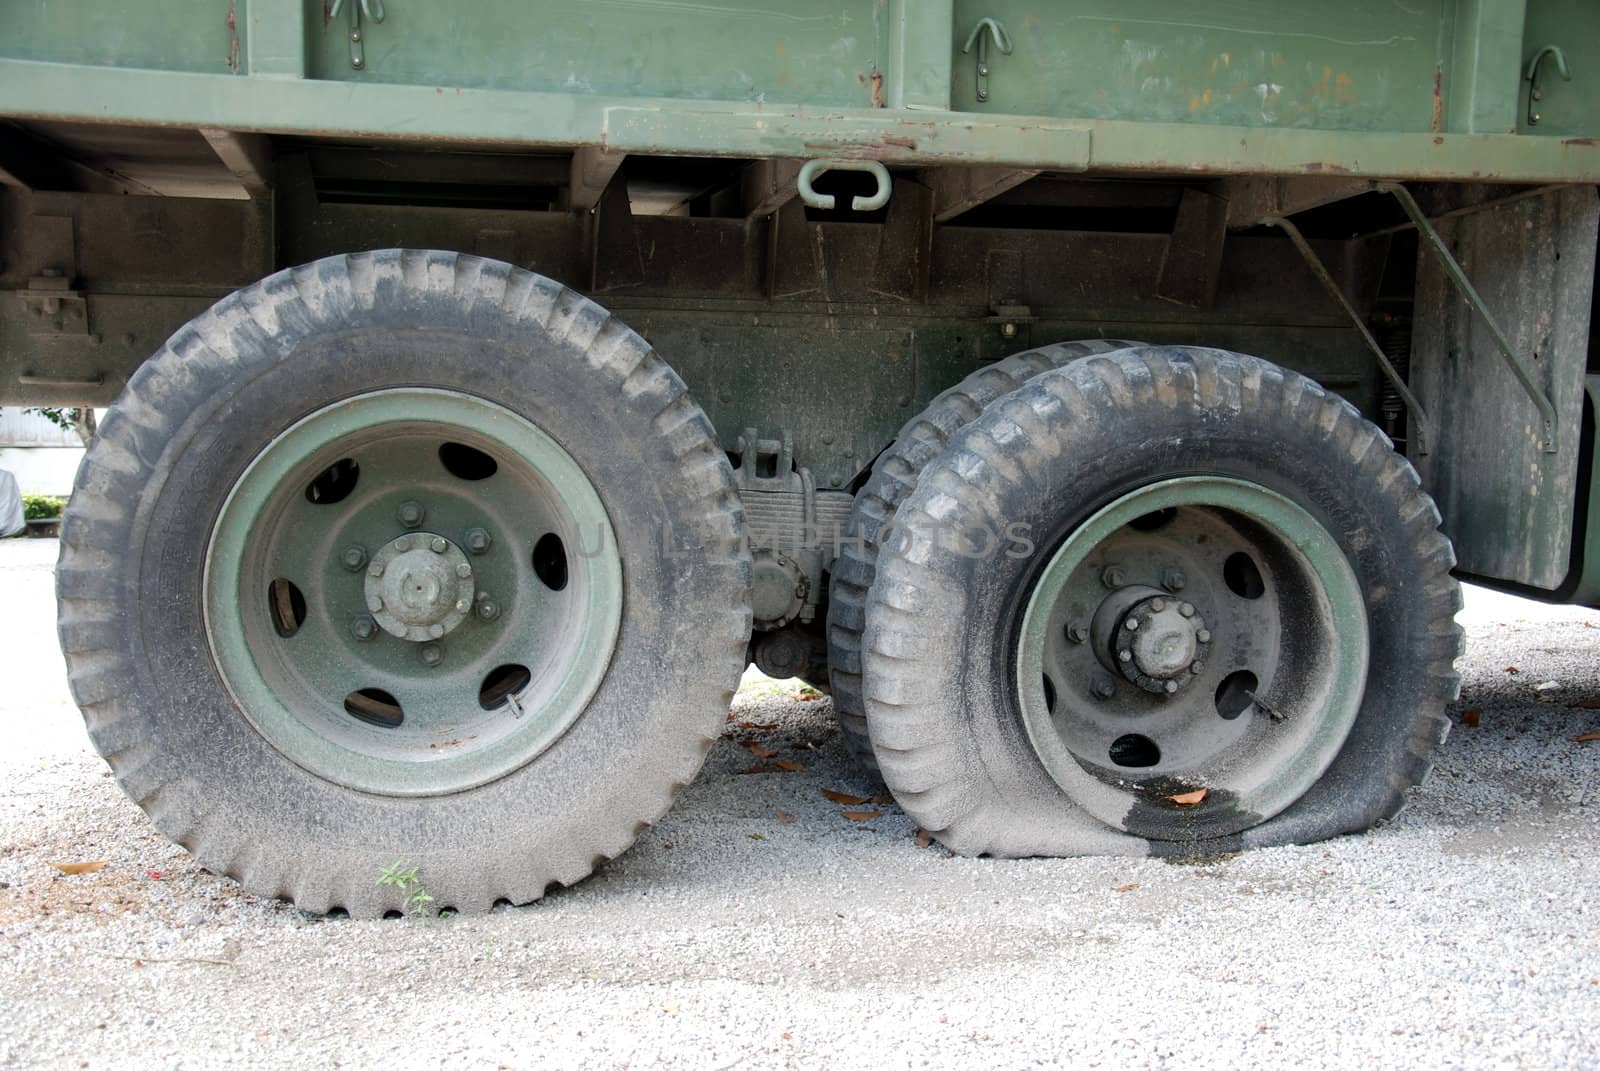 Detail Shot of a Flat Tire on a truk